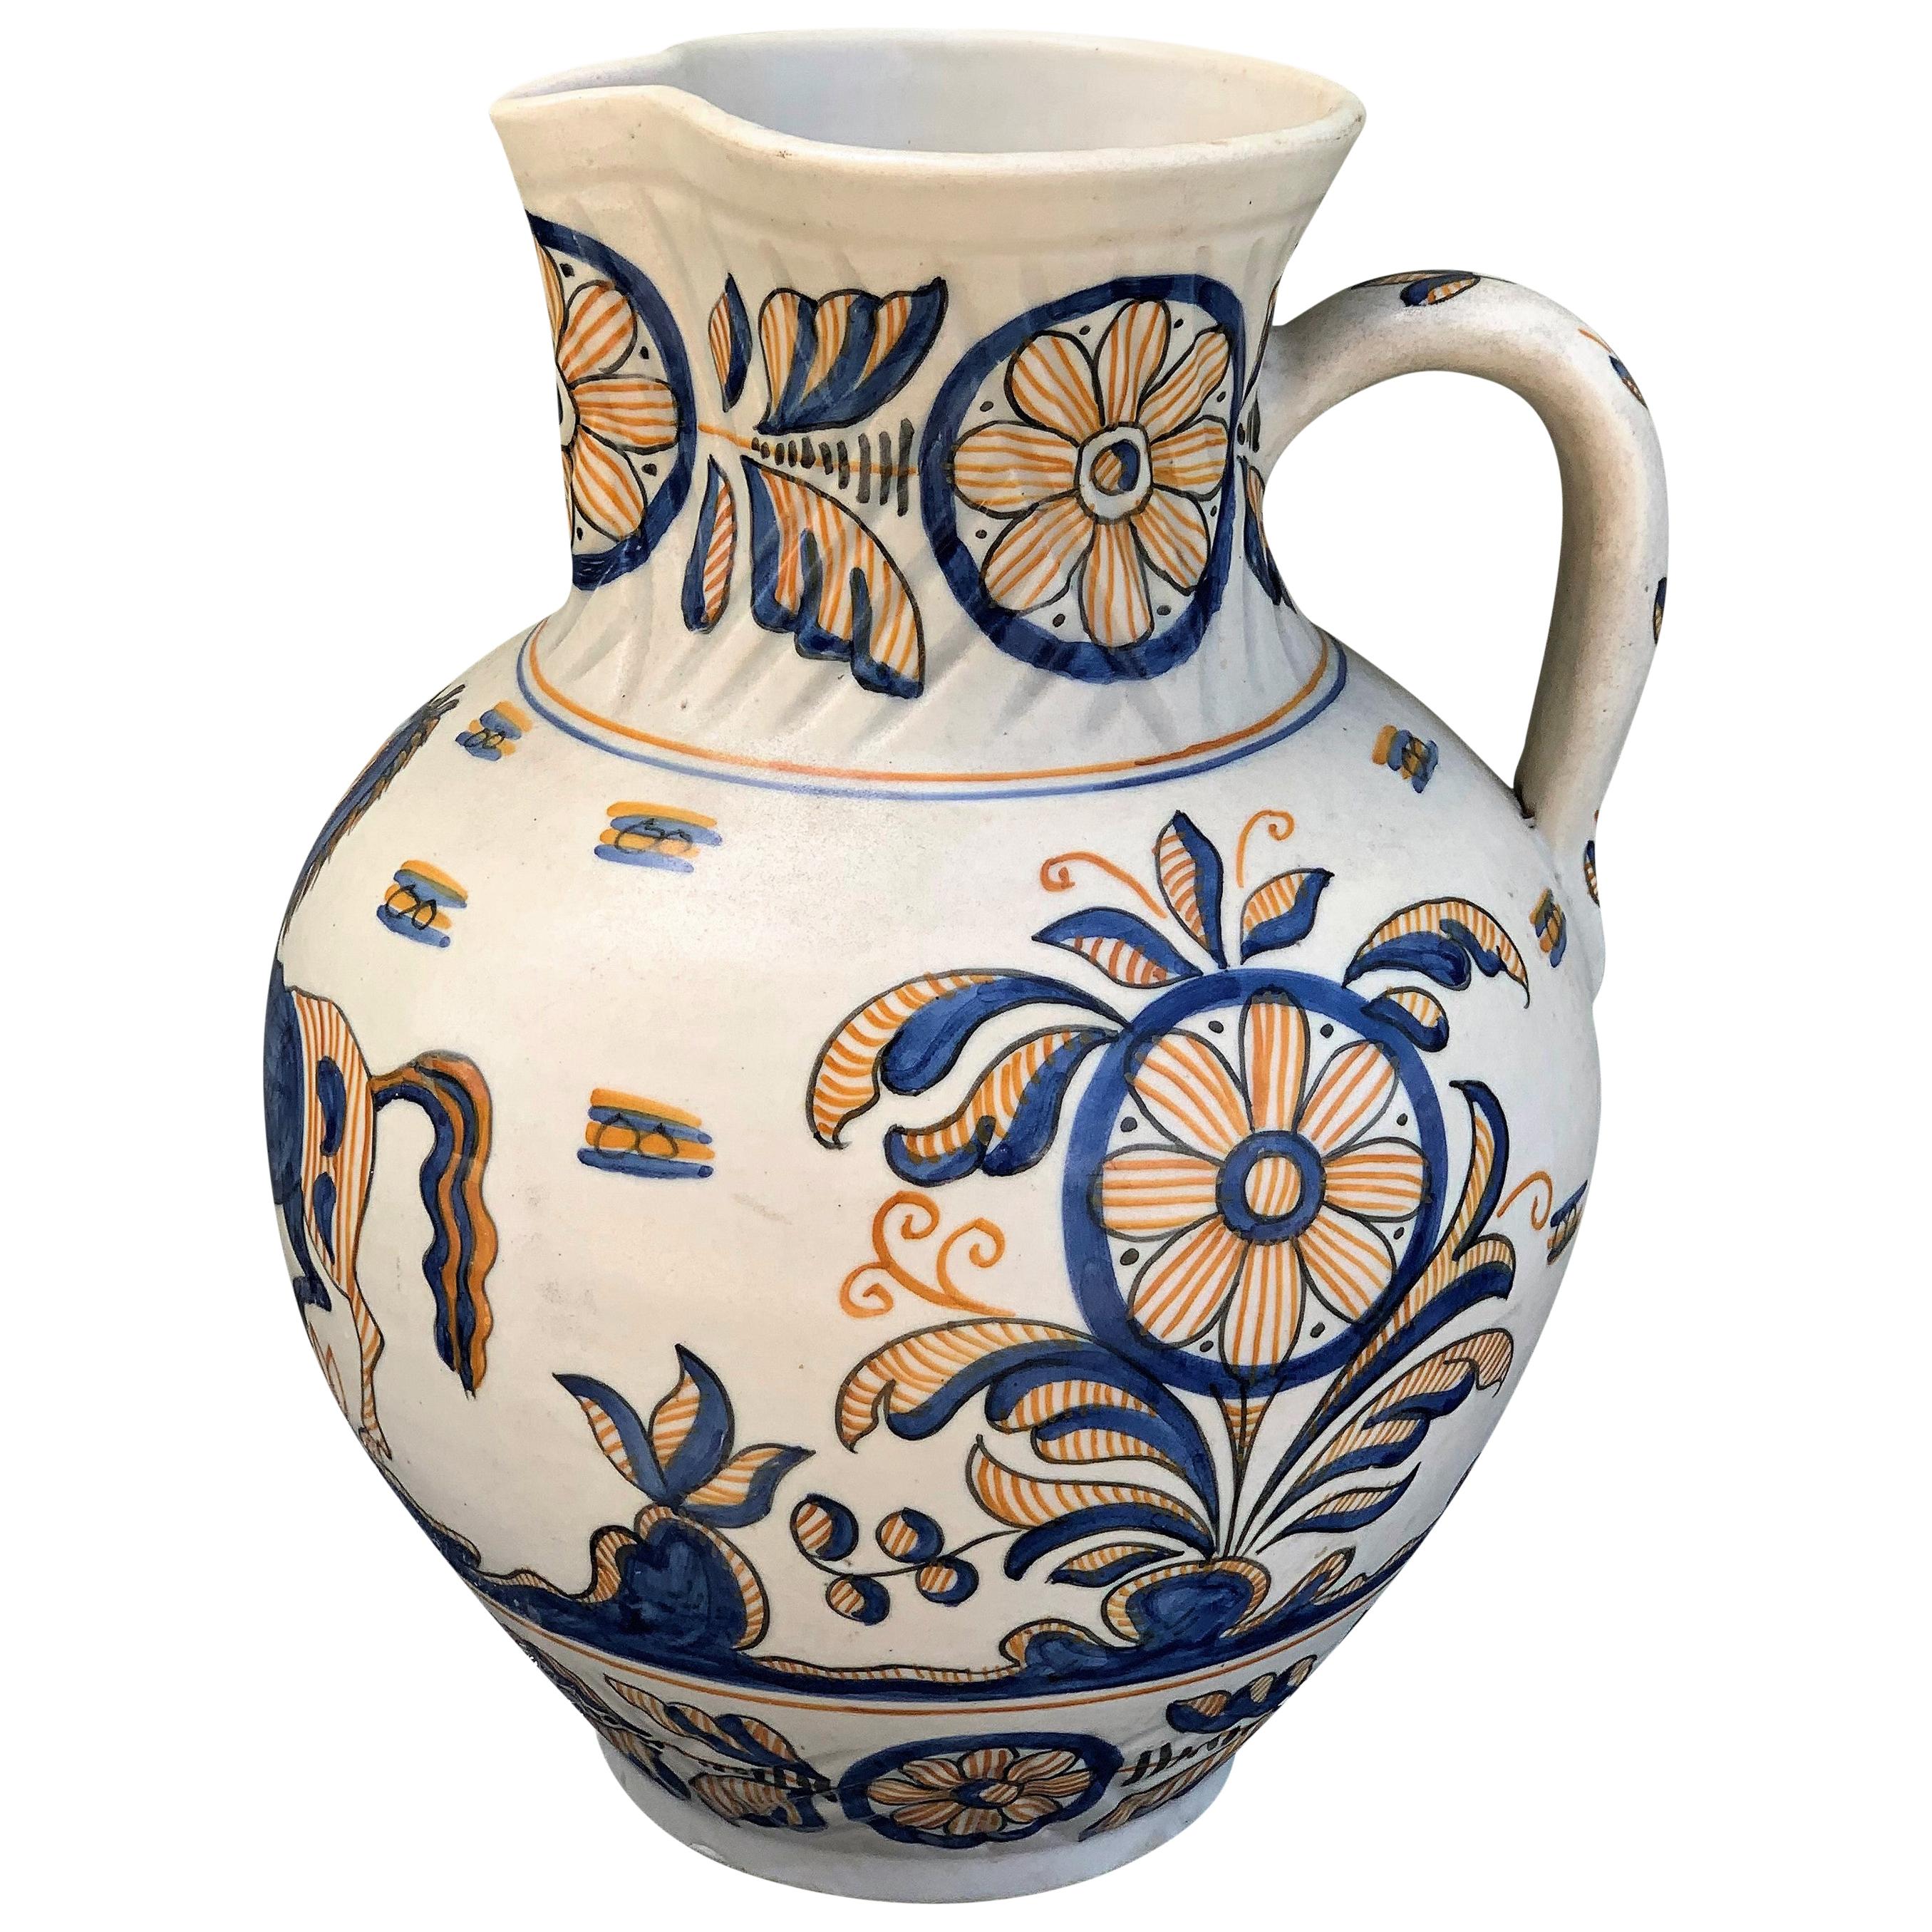 Striking Continental Glazed Earthenware Blue and Yellow Painted Urn, Talavera